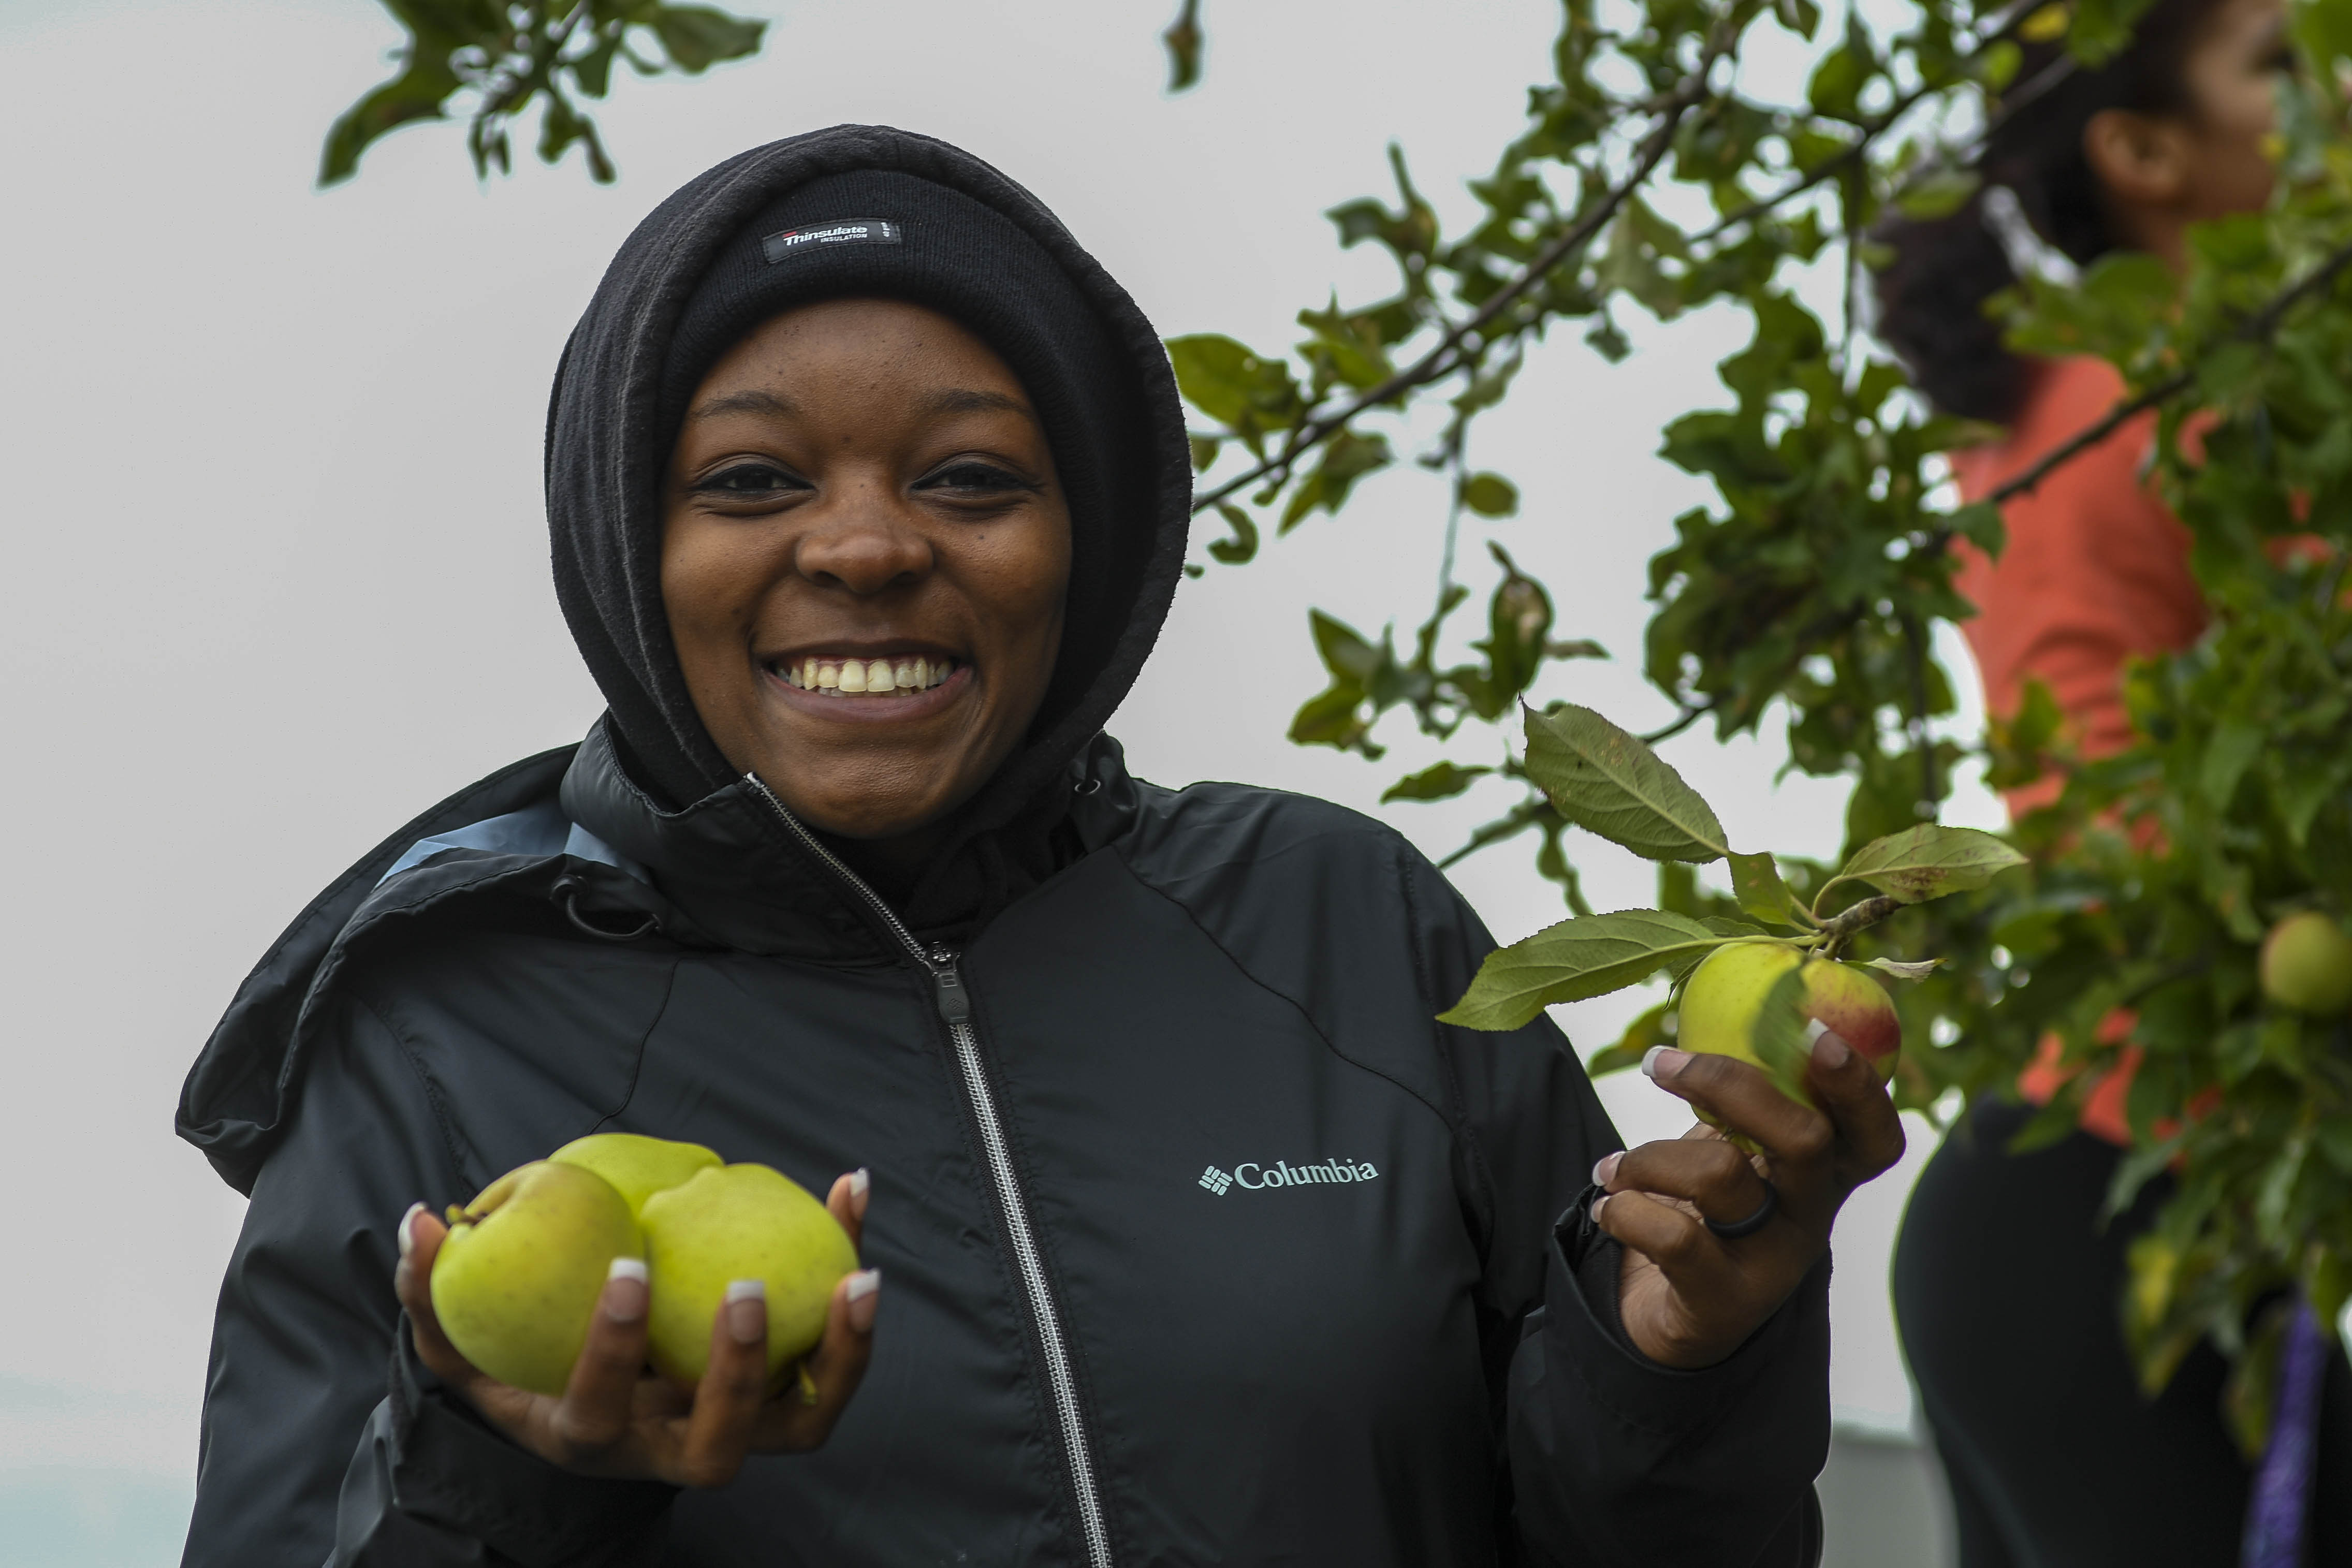 160923-N-WQ574-005 OAK HARBOR, Wash. (Sep. 23, 2016) – Aviation Ordnanceman Airman Kimondria Townsend, from Dallas, assigned to Patrol Squadron Four, poses with apples picked during a community relations event at Naval Air Station Whidbey Island's (NASWI) historic seaplane base. NASWI hosted the event to gather apples for the North Whidbey Help House. (U.S. Navy photo by Mass Communication Specialist 3rd Class Caleb Cooper/Released)